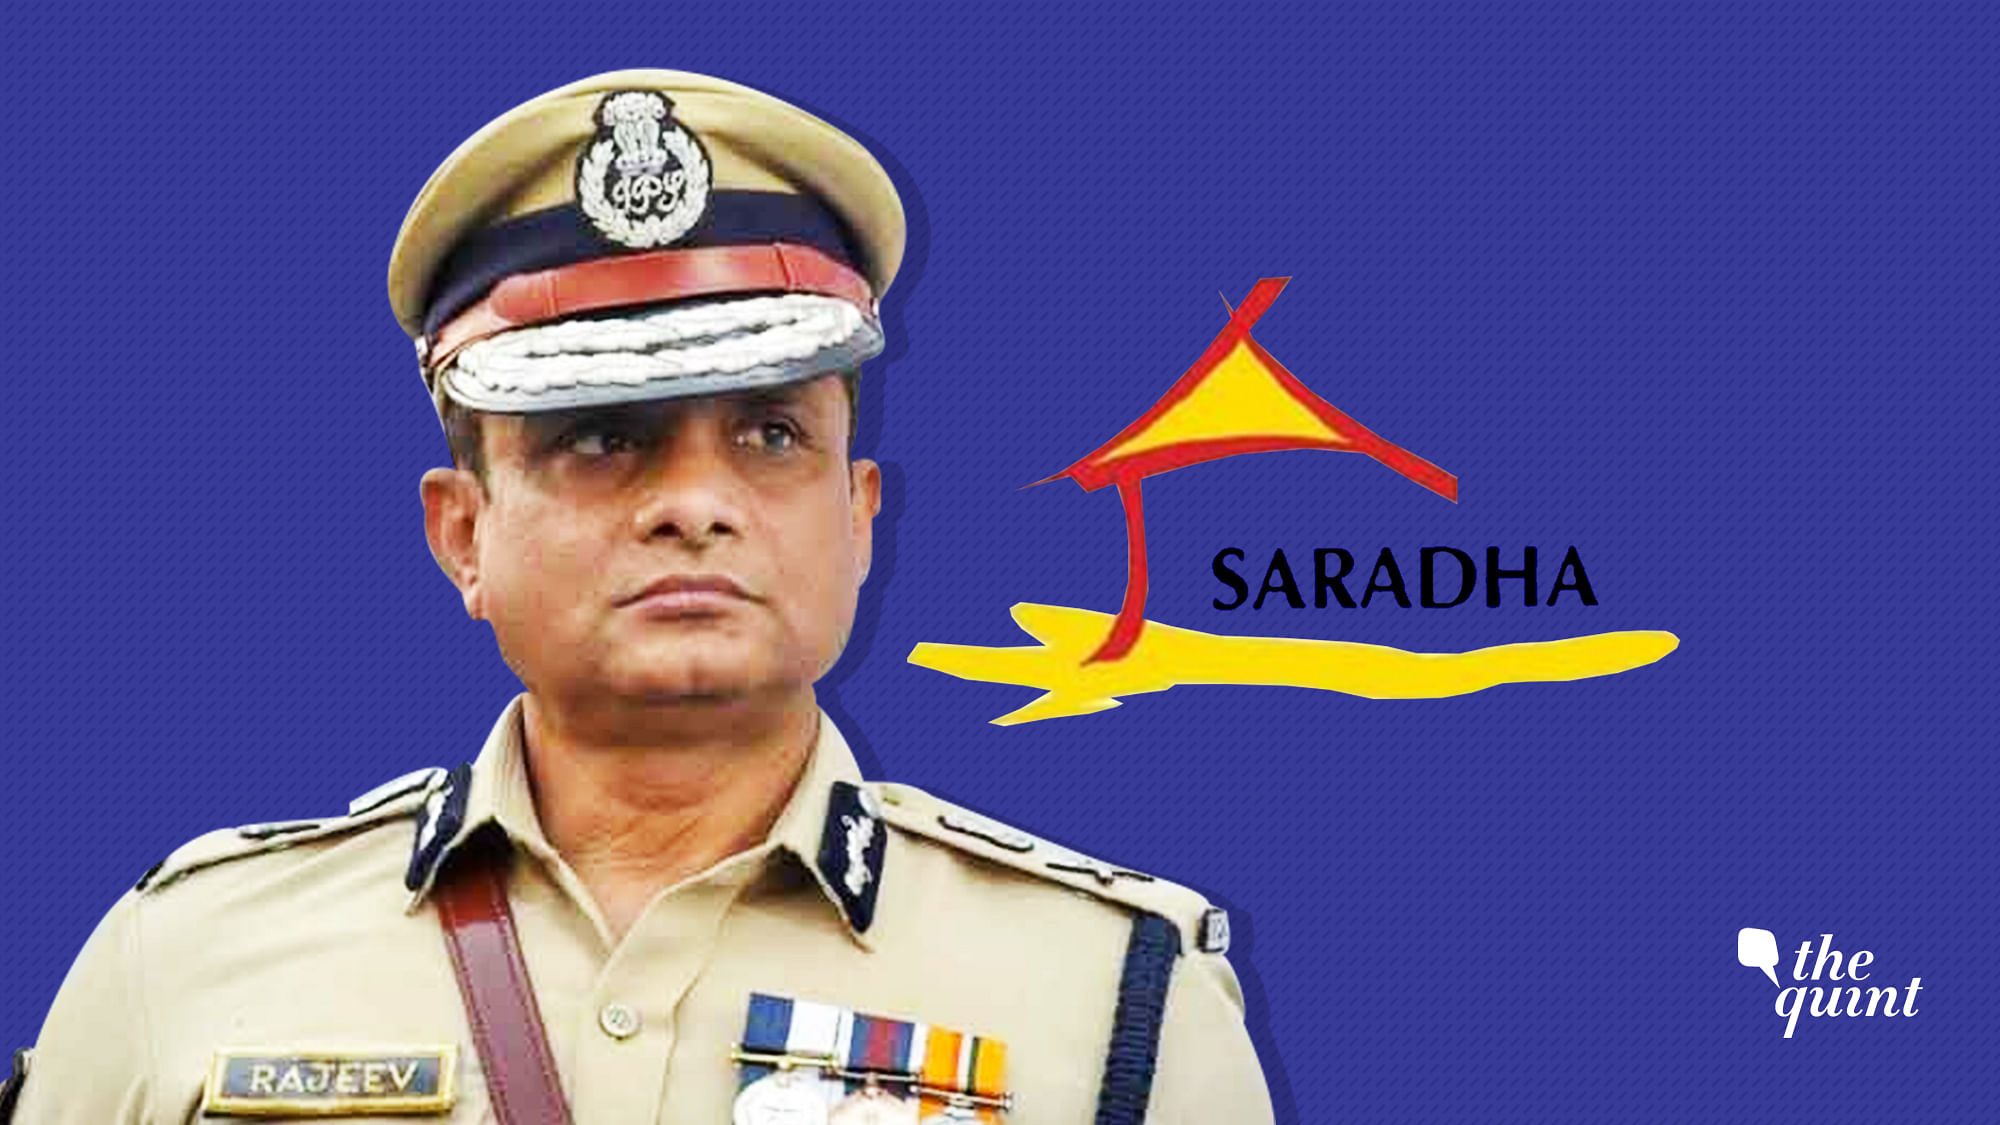 A look at the Sarada and Rose Valley ponzi scams and how former Kolkata top cop Rajeev Kumar got embroiled in the investigation.